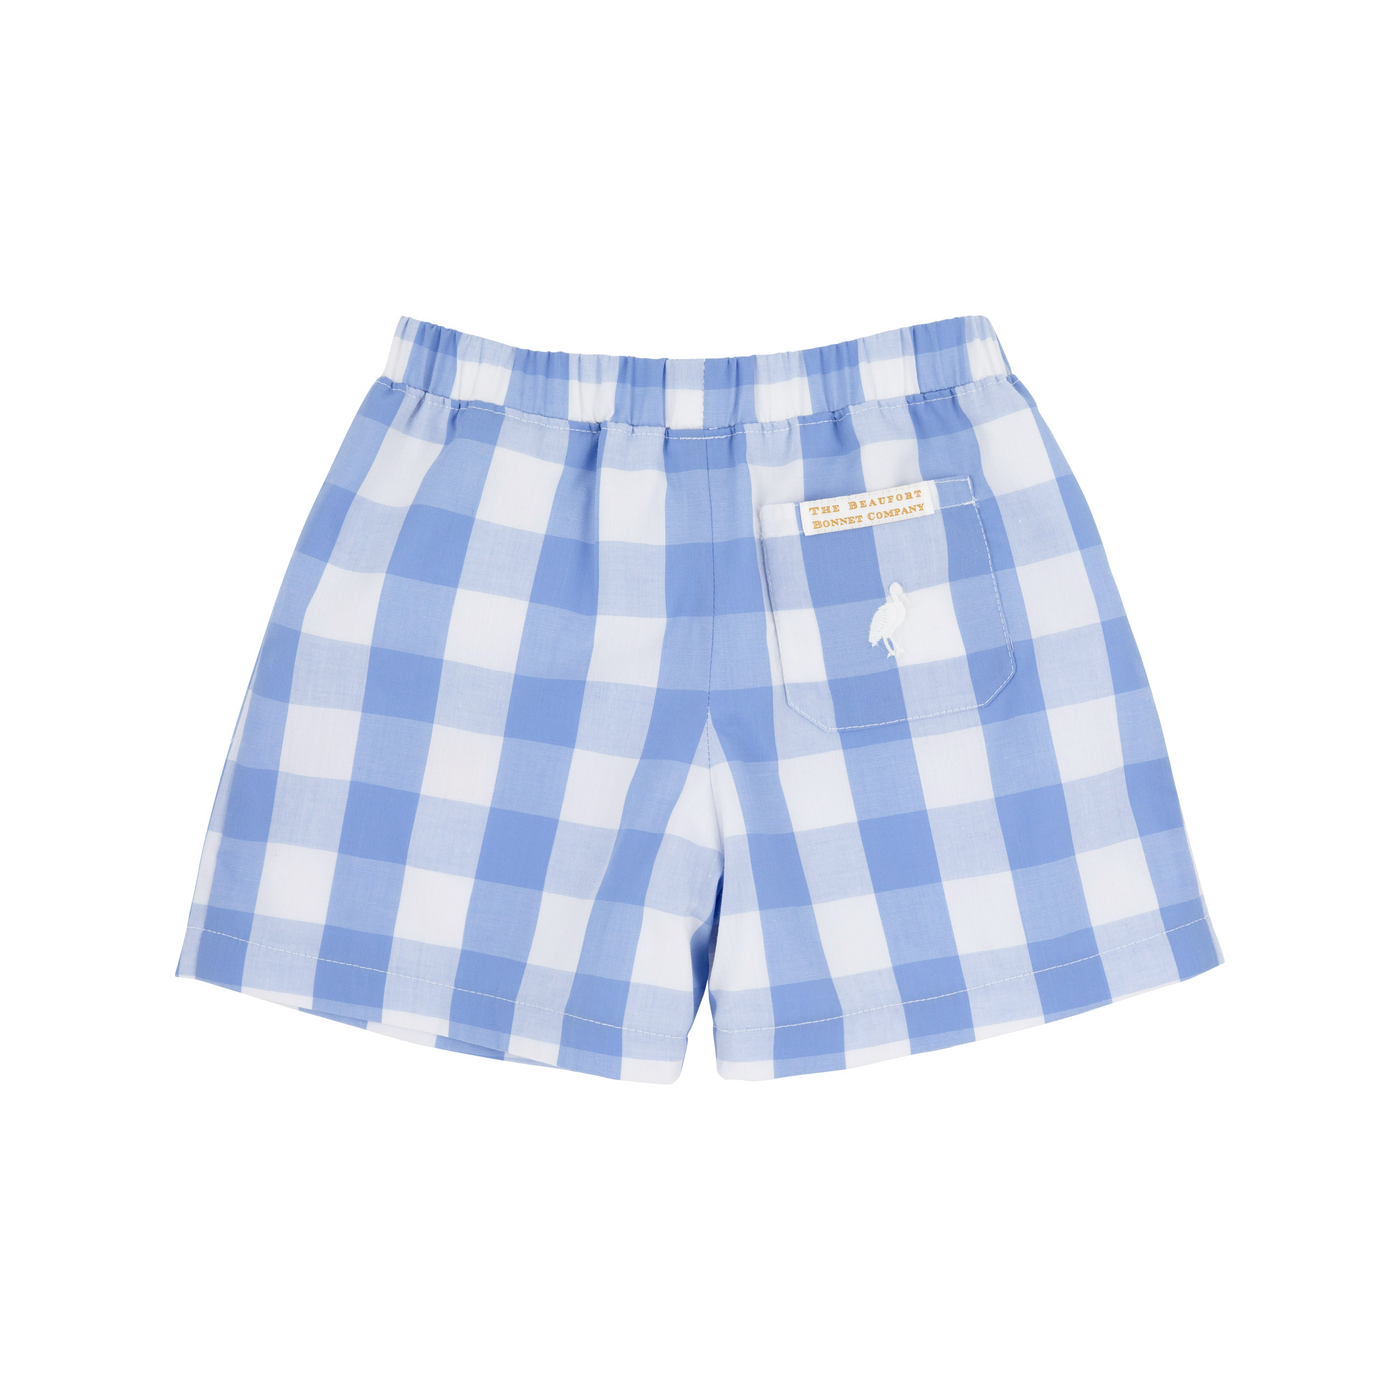 Shelton Shorts - Park City Periwinkle Chattanooga Check With Worth Avenue White